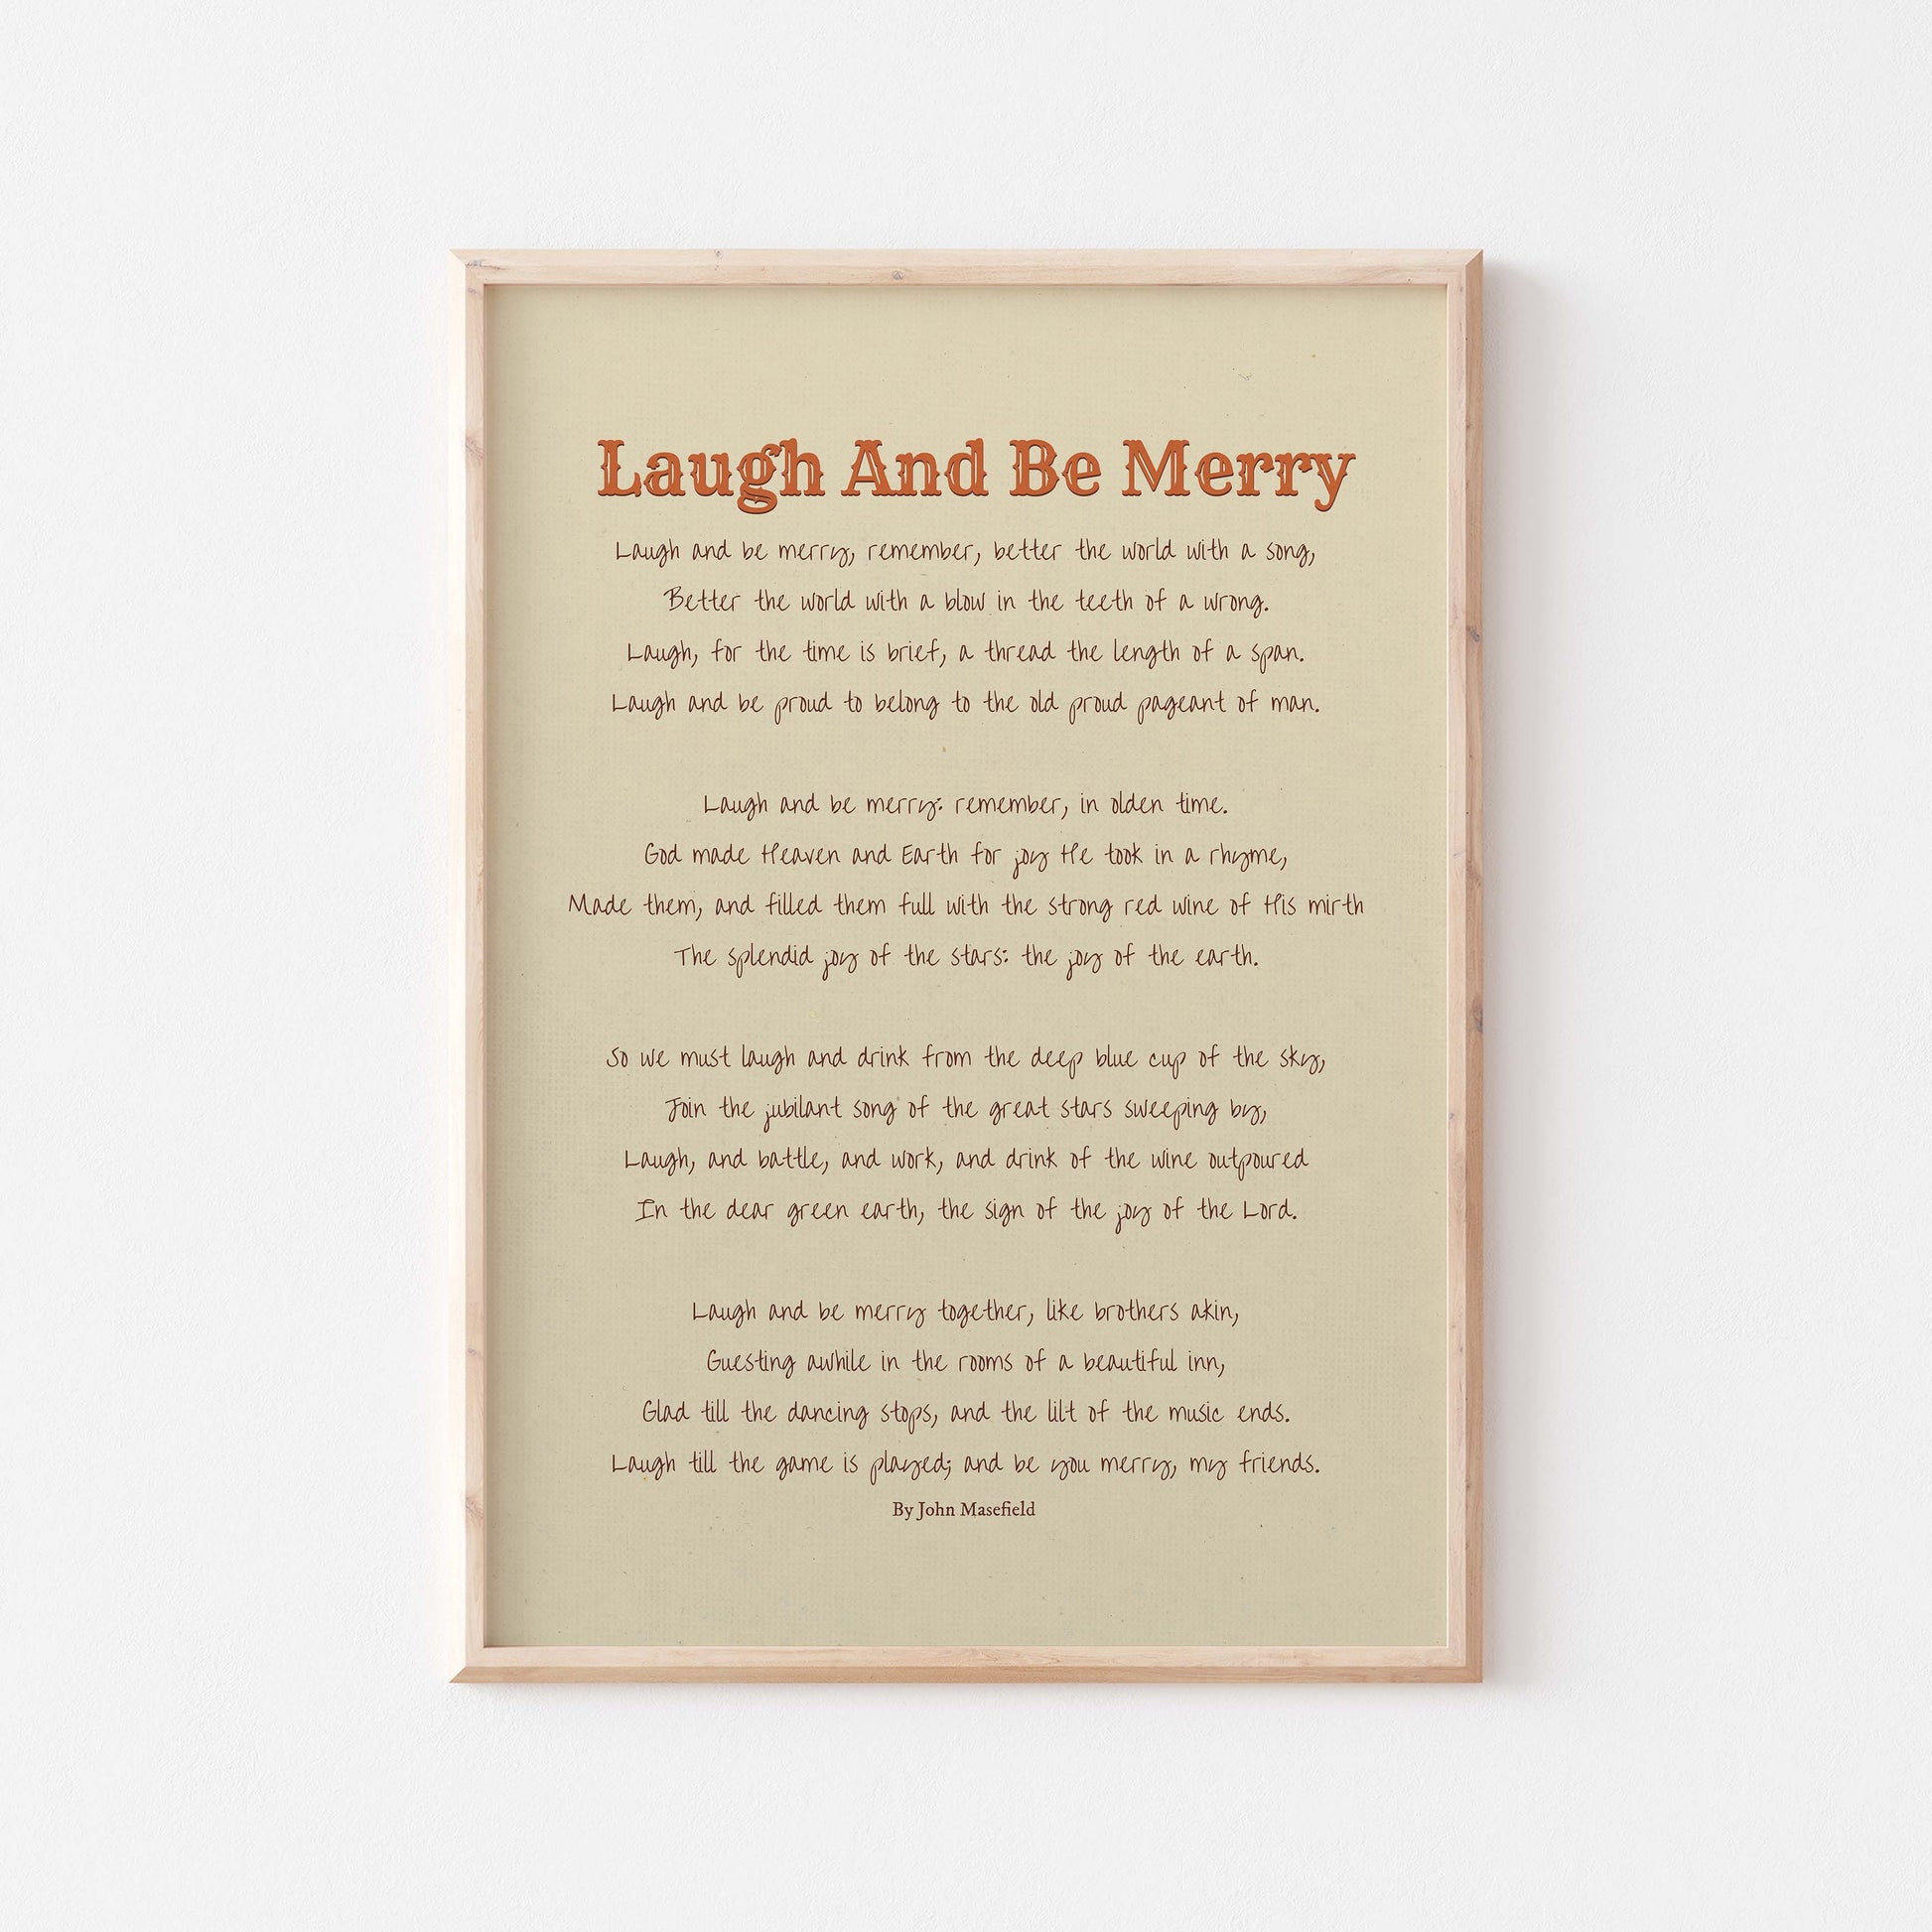 Laugh and be Merry poem poster in beige, brown & red in wood frame display